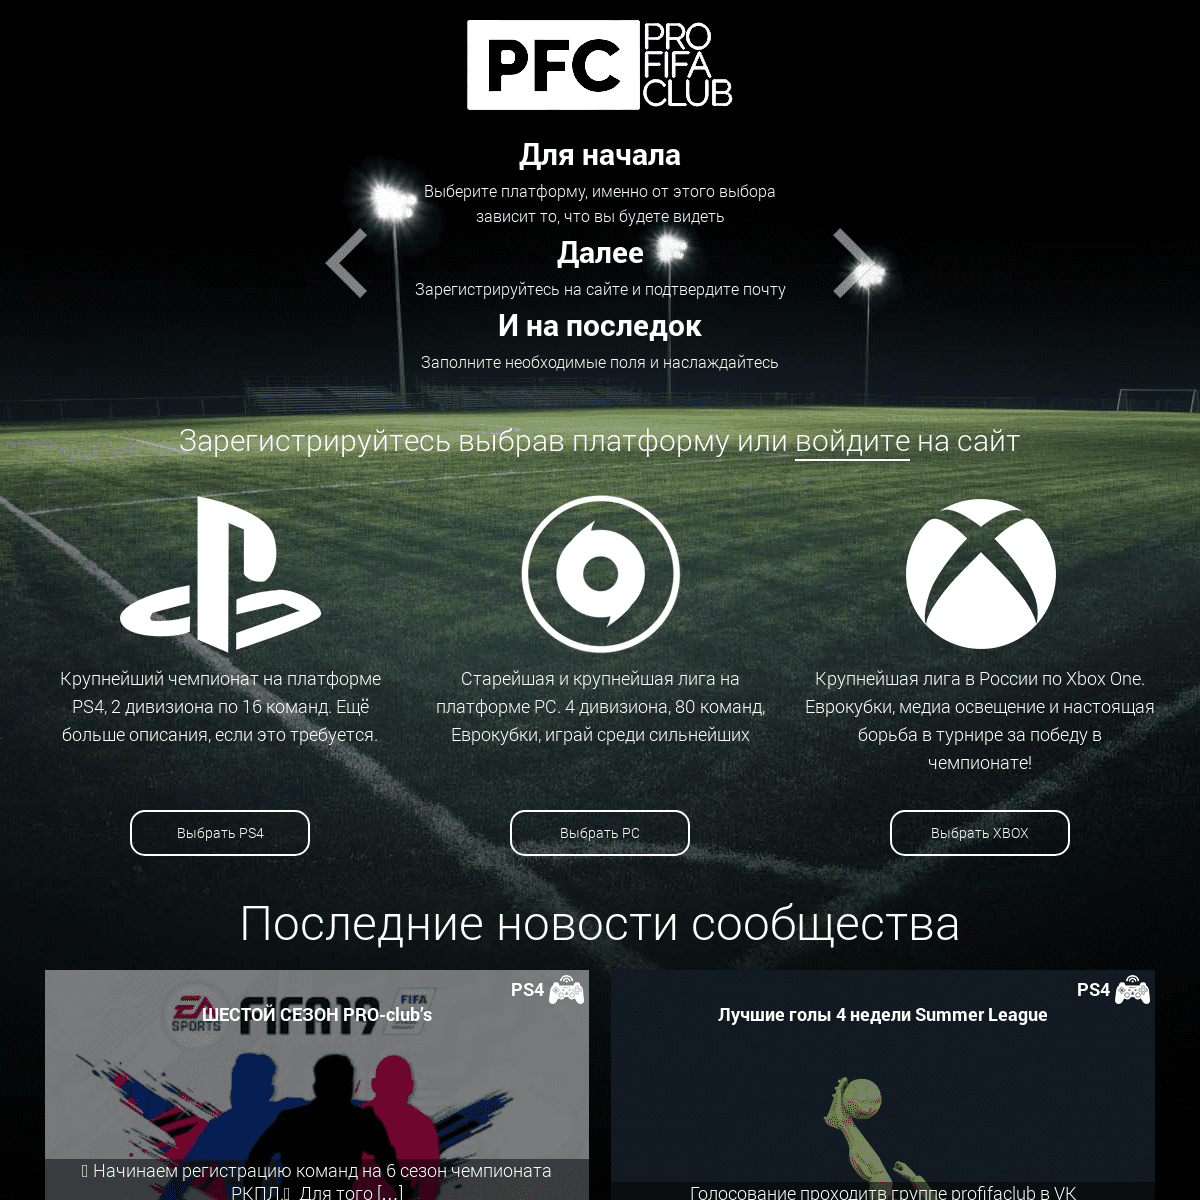 A complete backup of profifaclub.com